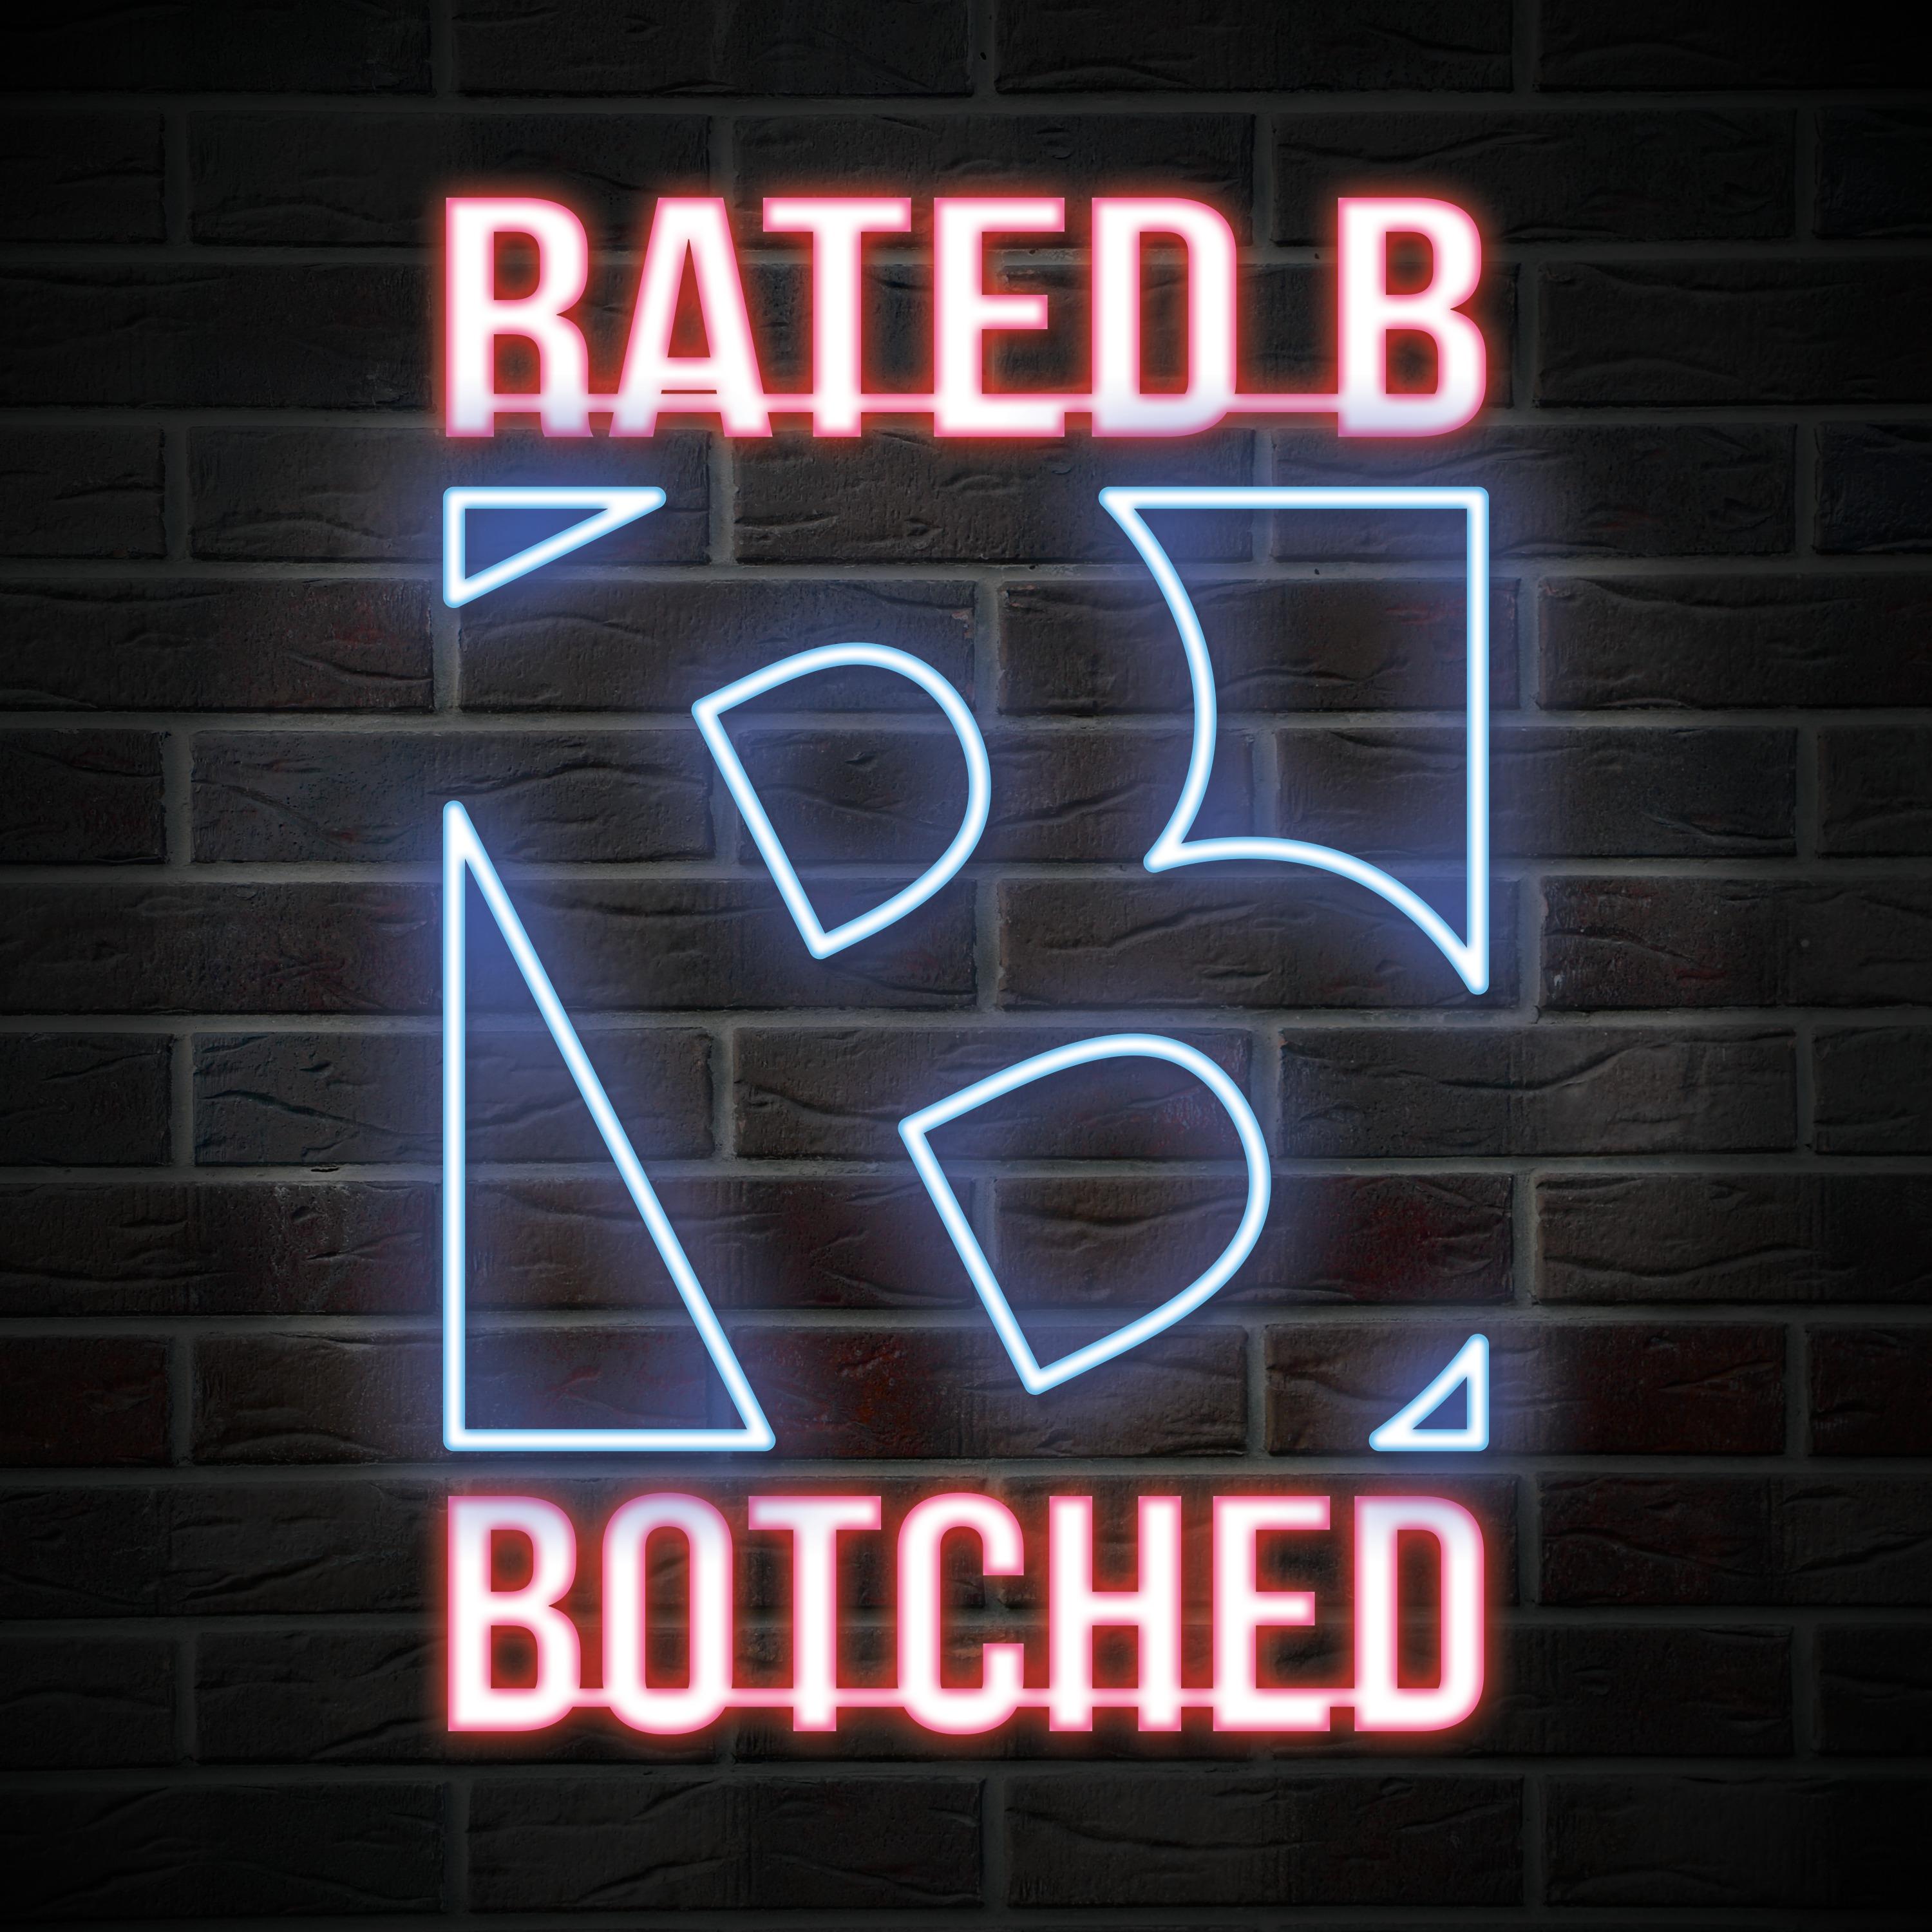 Rated B for Botched